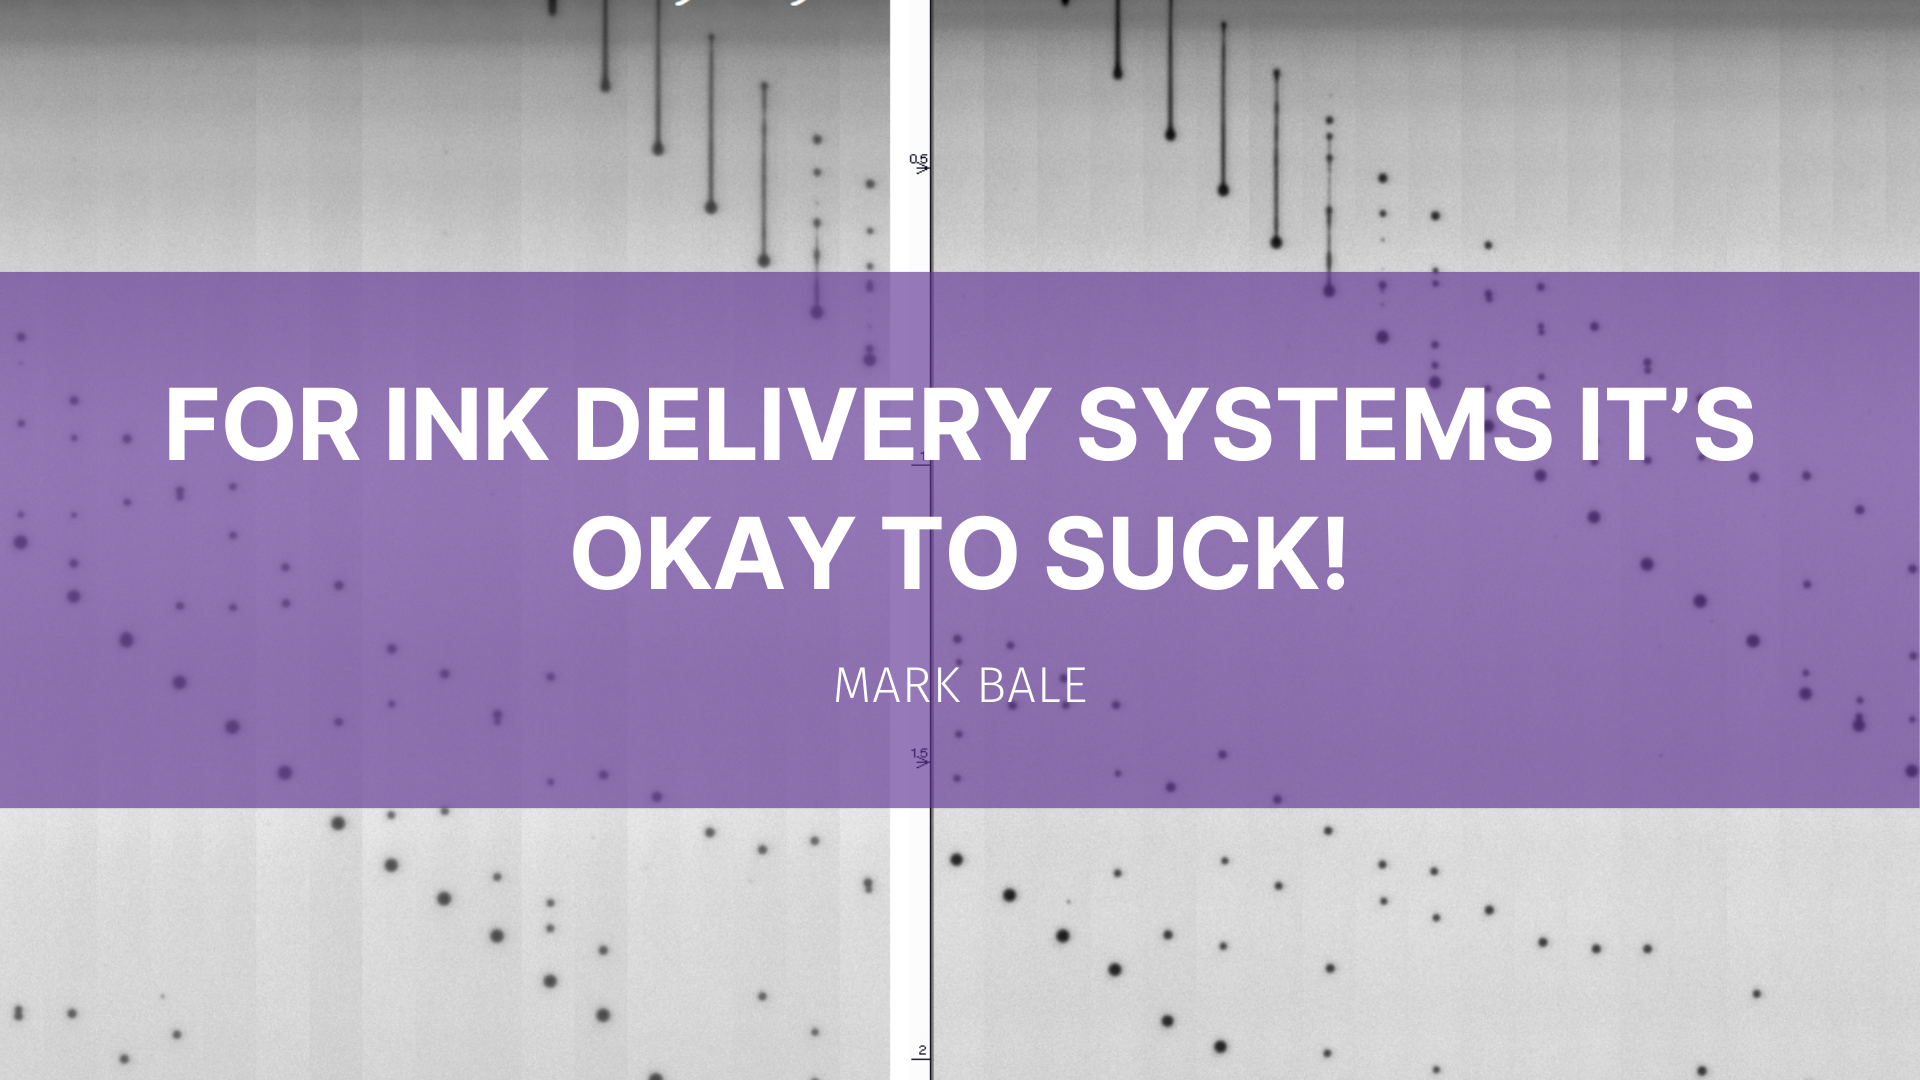 Featured image for “For Ink Delivery Systems It’s okay to suck!”